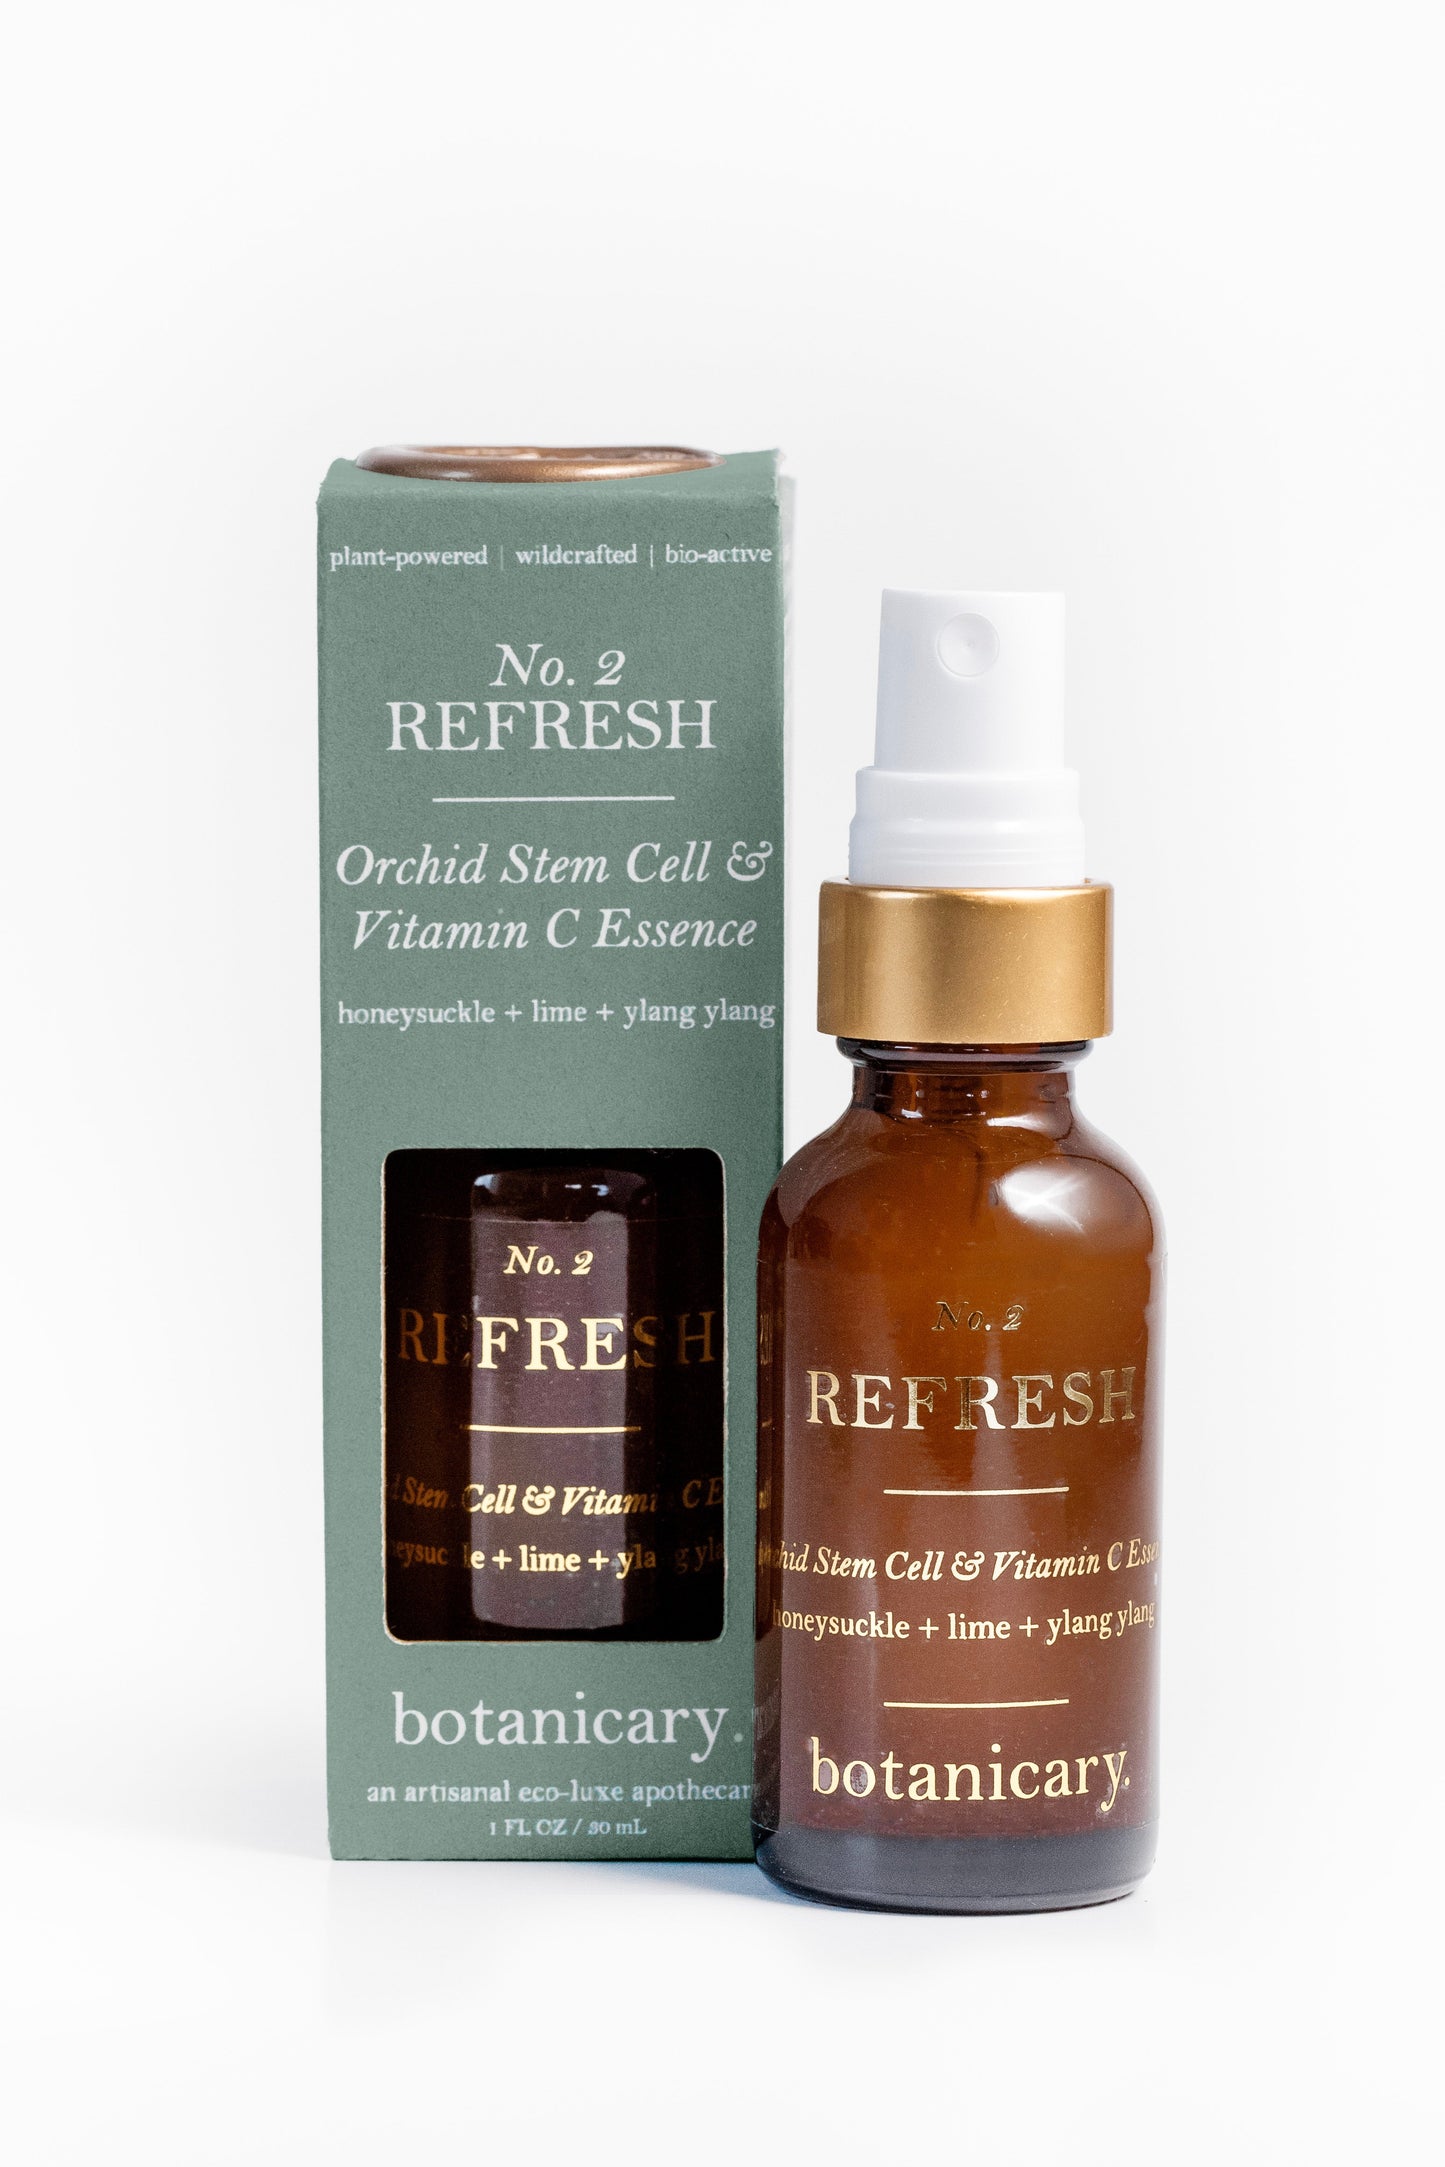 No. 2 REFRESH - Orchid Stem Cell & Vitamin C Essence